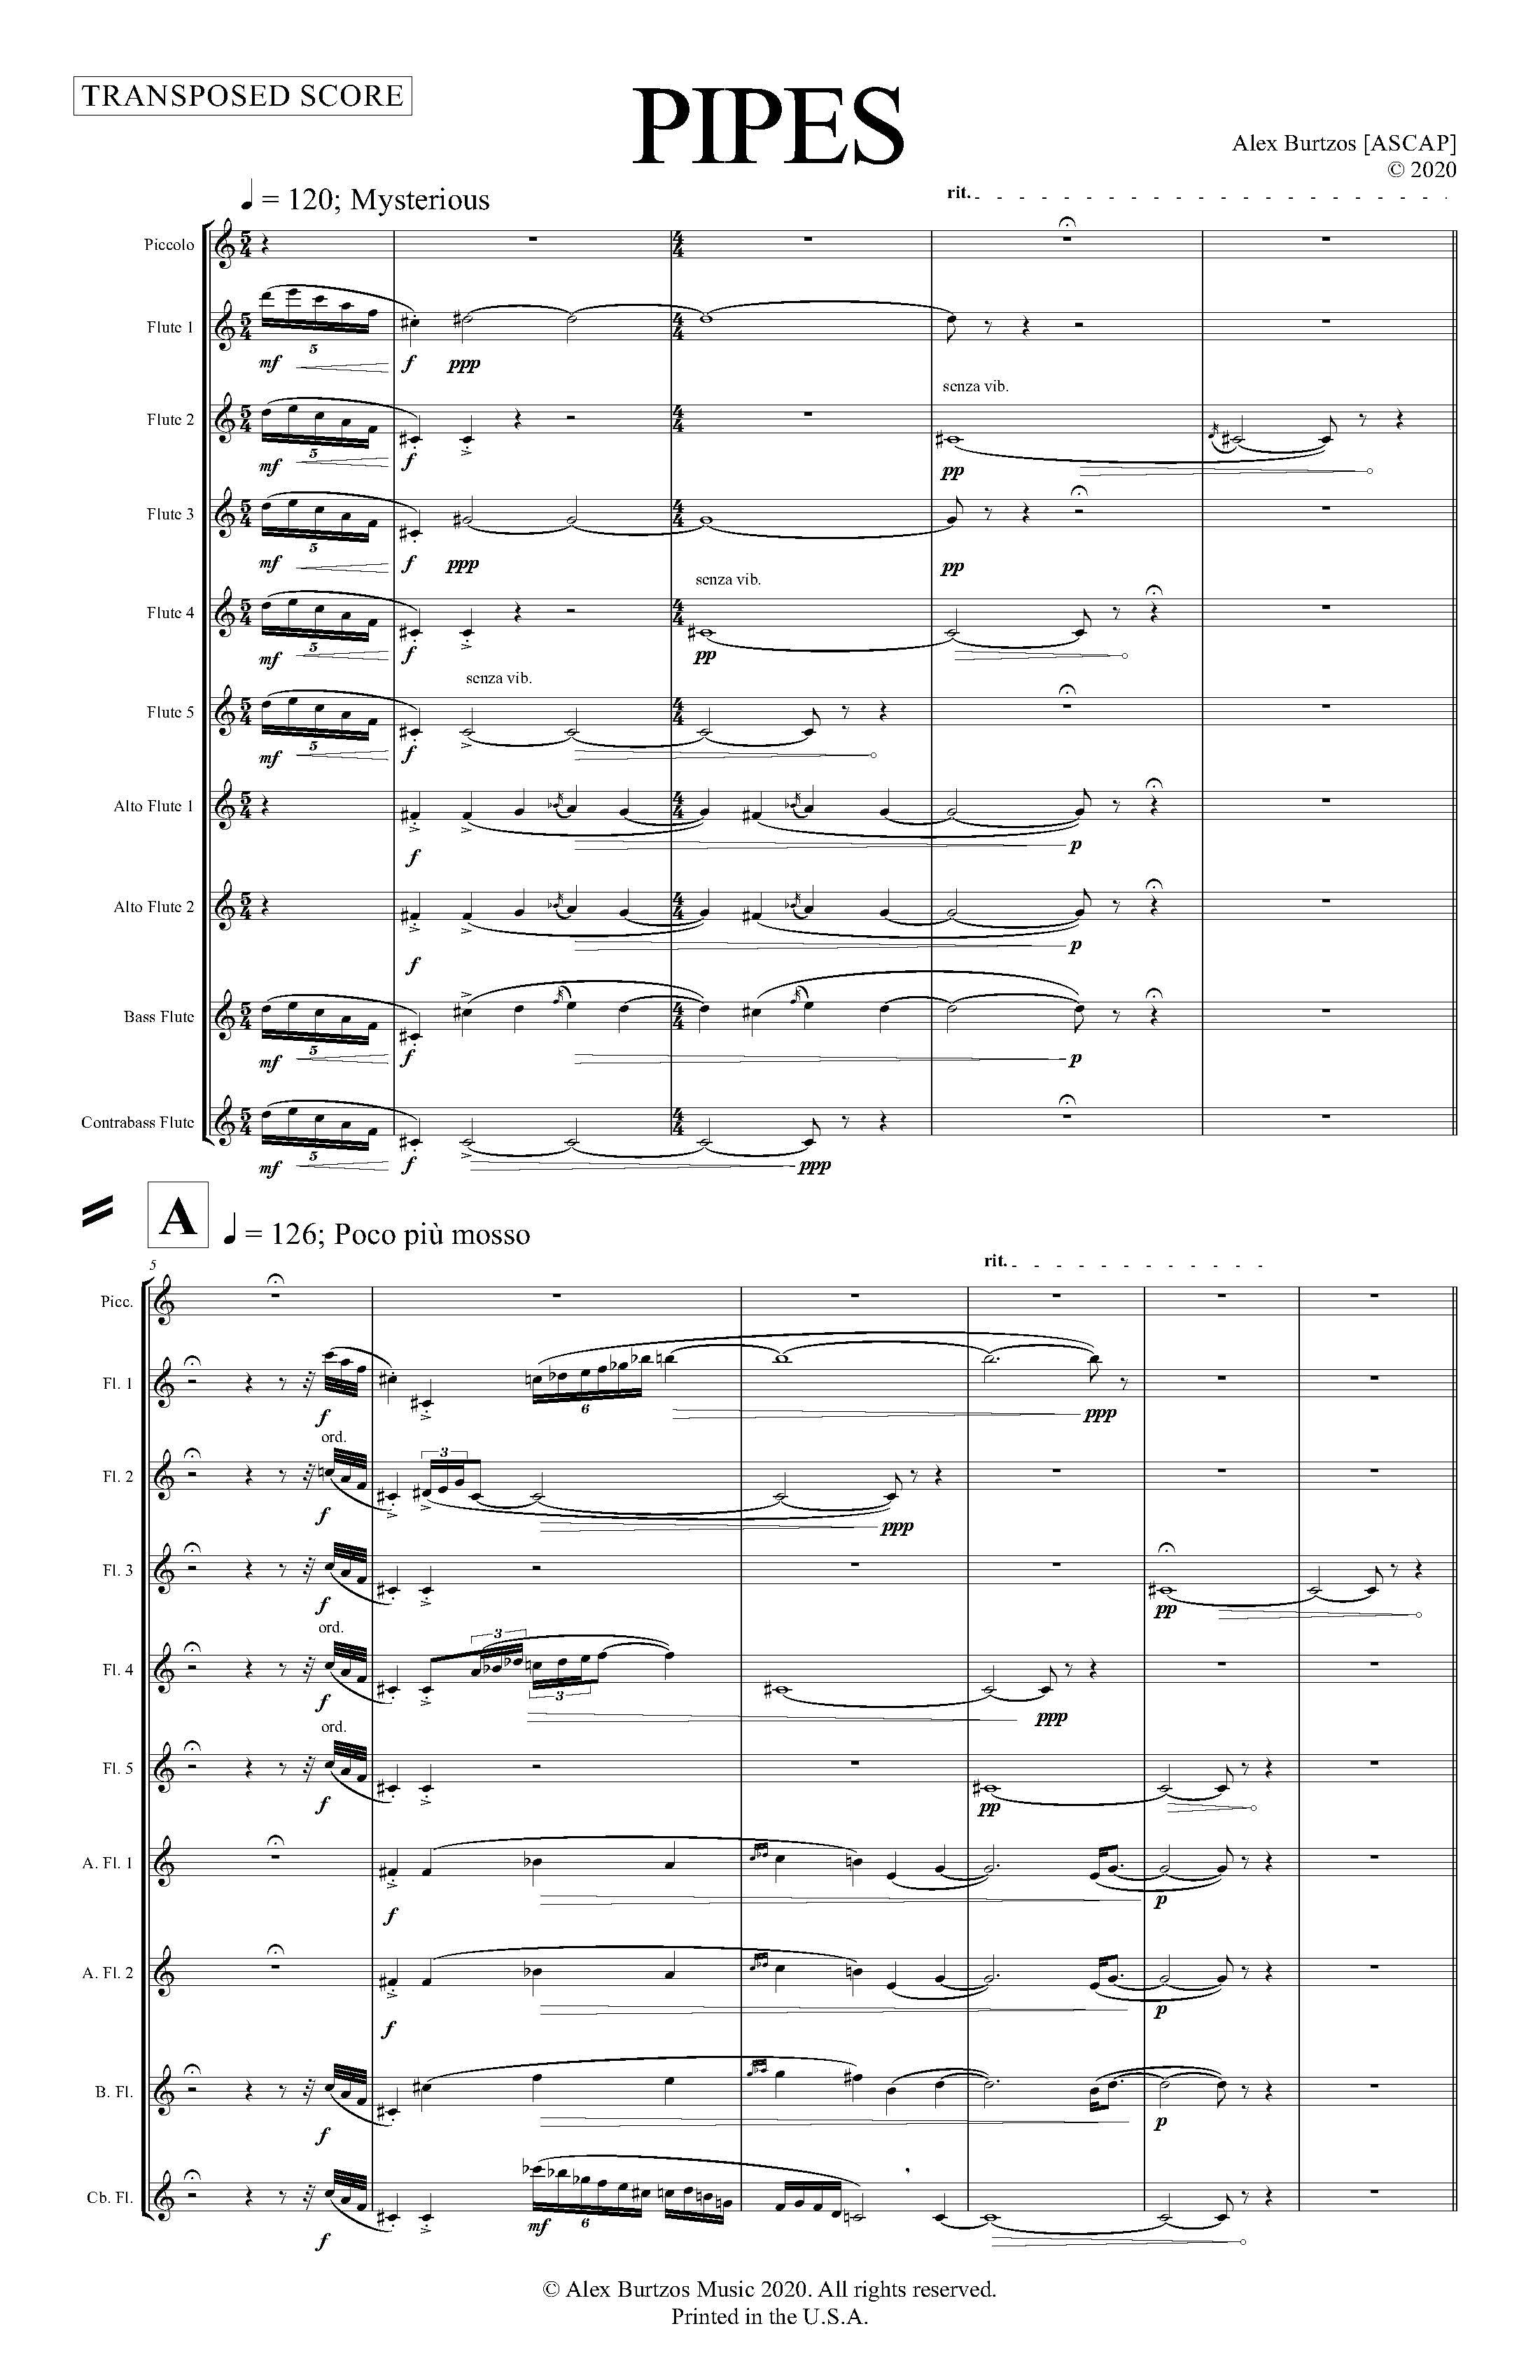 PIPES - Complete Score_Page_07.jpg